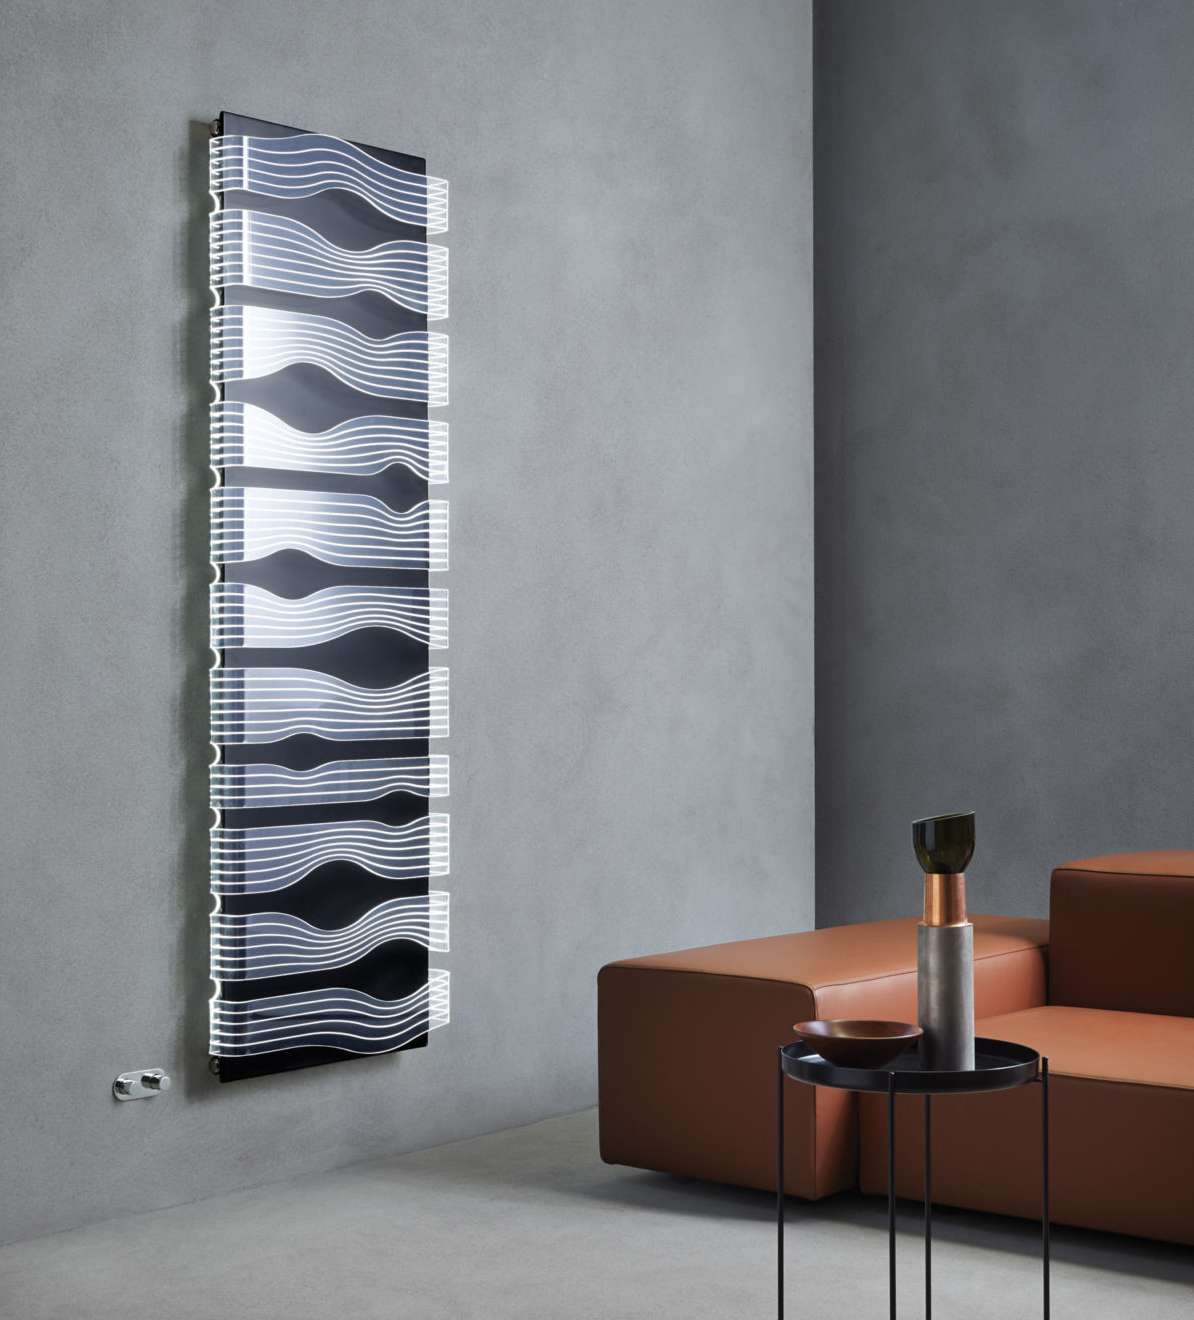 Wall heater faced with LED back lit acrylic panels